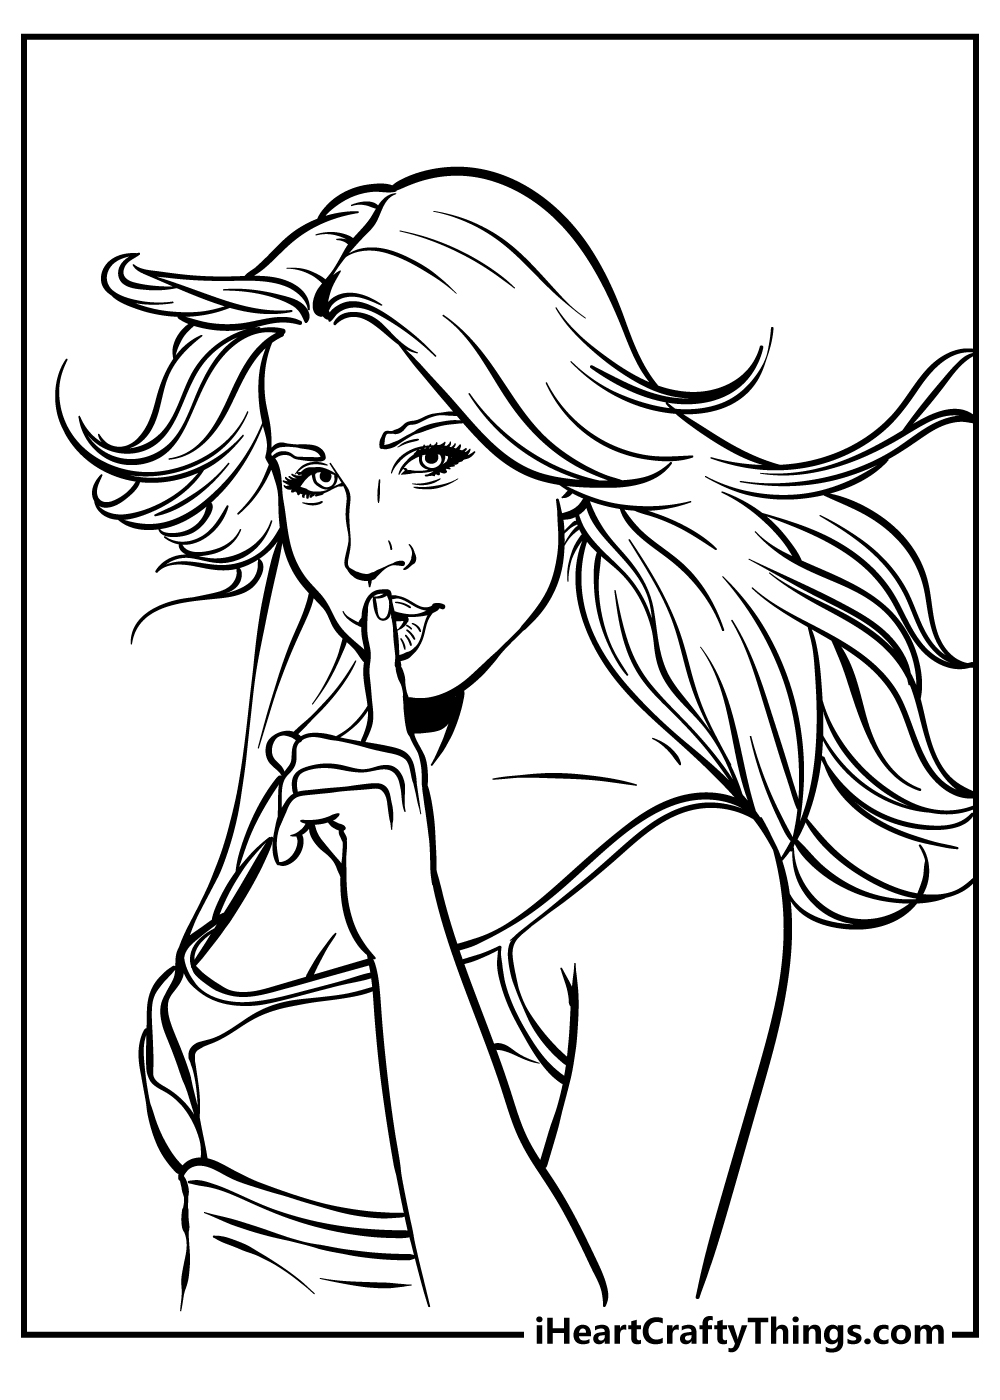 Coloring Pages For Teens free pdf